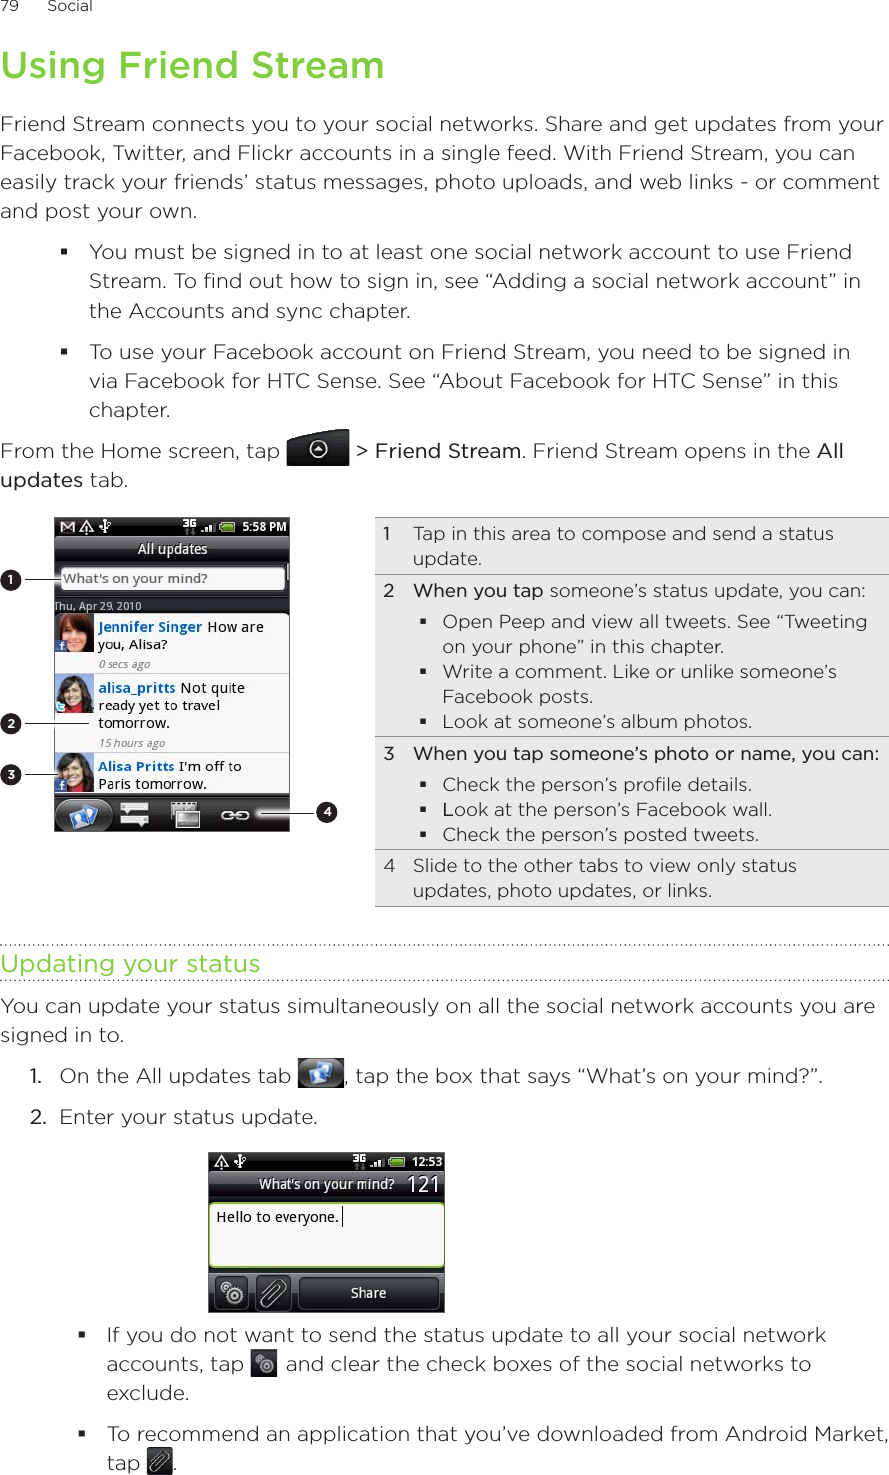 79      Social      Using Friend StreamFriend Stream connects you to your social networks. Share and get updates from your Facebook, Twitter, and Flickr accounts in a single feed. With Friend Stream, you can easily track your friends’ status messages, photo uploads, and web links - or comment and post your own.You must be signed in to at least one social network account to use Friend Stream. To find out how to sign in, see “Adding a social network account” in the Accounts and sync chapter.To use your Facebook account on Friend Stream, you need to be signed in via Facebook for HTC Sense. See “About Facebook for HTC Sense” in this chapter.From the Home screen, tap  &gt; Friend Stream. Friend Stream opens in the All updates tab. 21431  Tap in this area to compose and send a status update.2  When you tap someone’s status update, you can:Open Peep and view all tweets. See “Tweeting on your phone” in this chapter.Write a comment. Like or unlike someone’s Facebook posts.Look at someone’s album photos.3  When you tap someone’s photo or name, you can:Check the person’s profile details.Look at the person’s Facebook wall.Check the person’s posted tweets.4  Slide to the other tabs to view only status updates, photo updates, or links.Updating your statusYou can update your status simultaneously on all the social network accounts you are signed in to.On the All updates tab  , tap the box that says “What’s on your mind?”.Enter your status update.If you do not want to send the status update to all your social network accounts, tap    and clear the check boxes of the social networks to exclude.To recommend an application that you’ve downloaded from Android Market, tap  .  1.2.